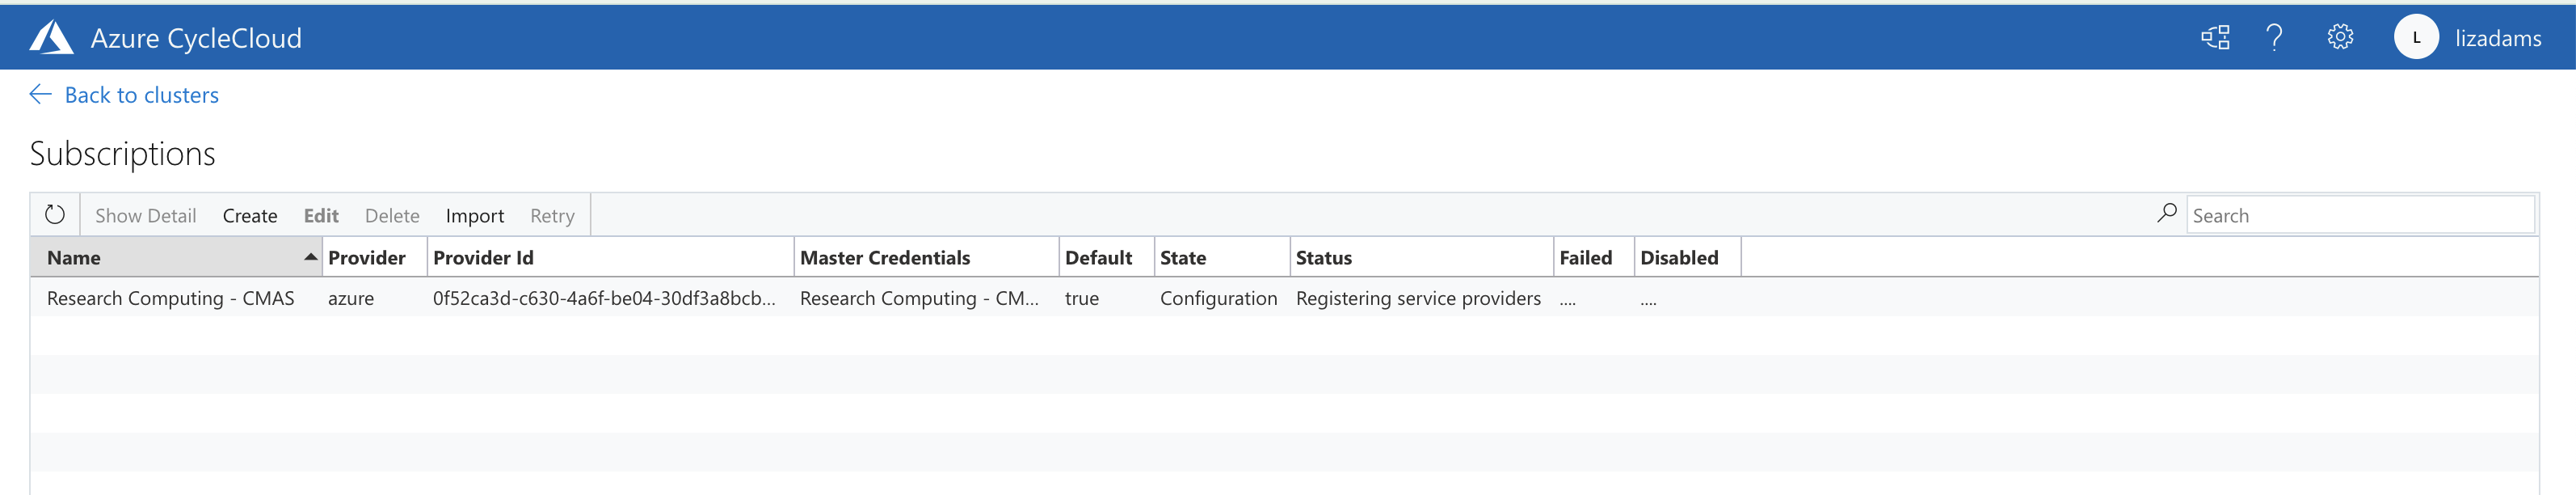 Azure Cycle Cloud Subscriptions Registering Service Providers